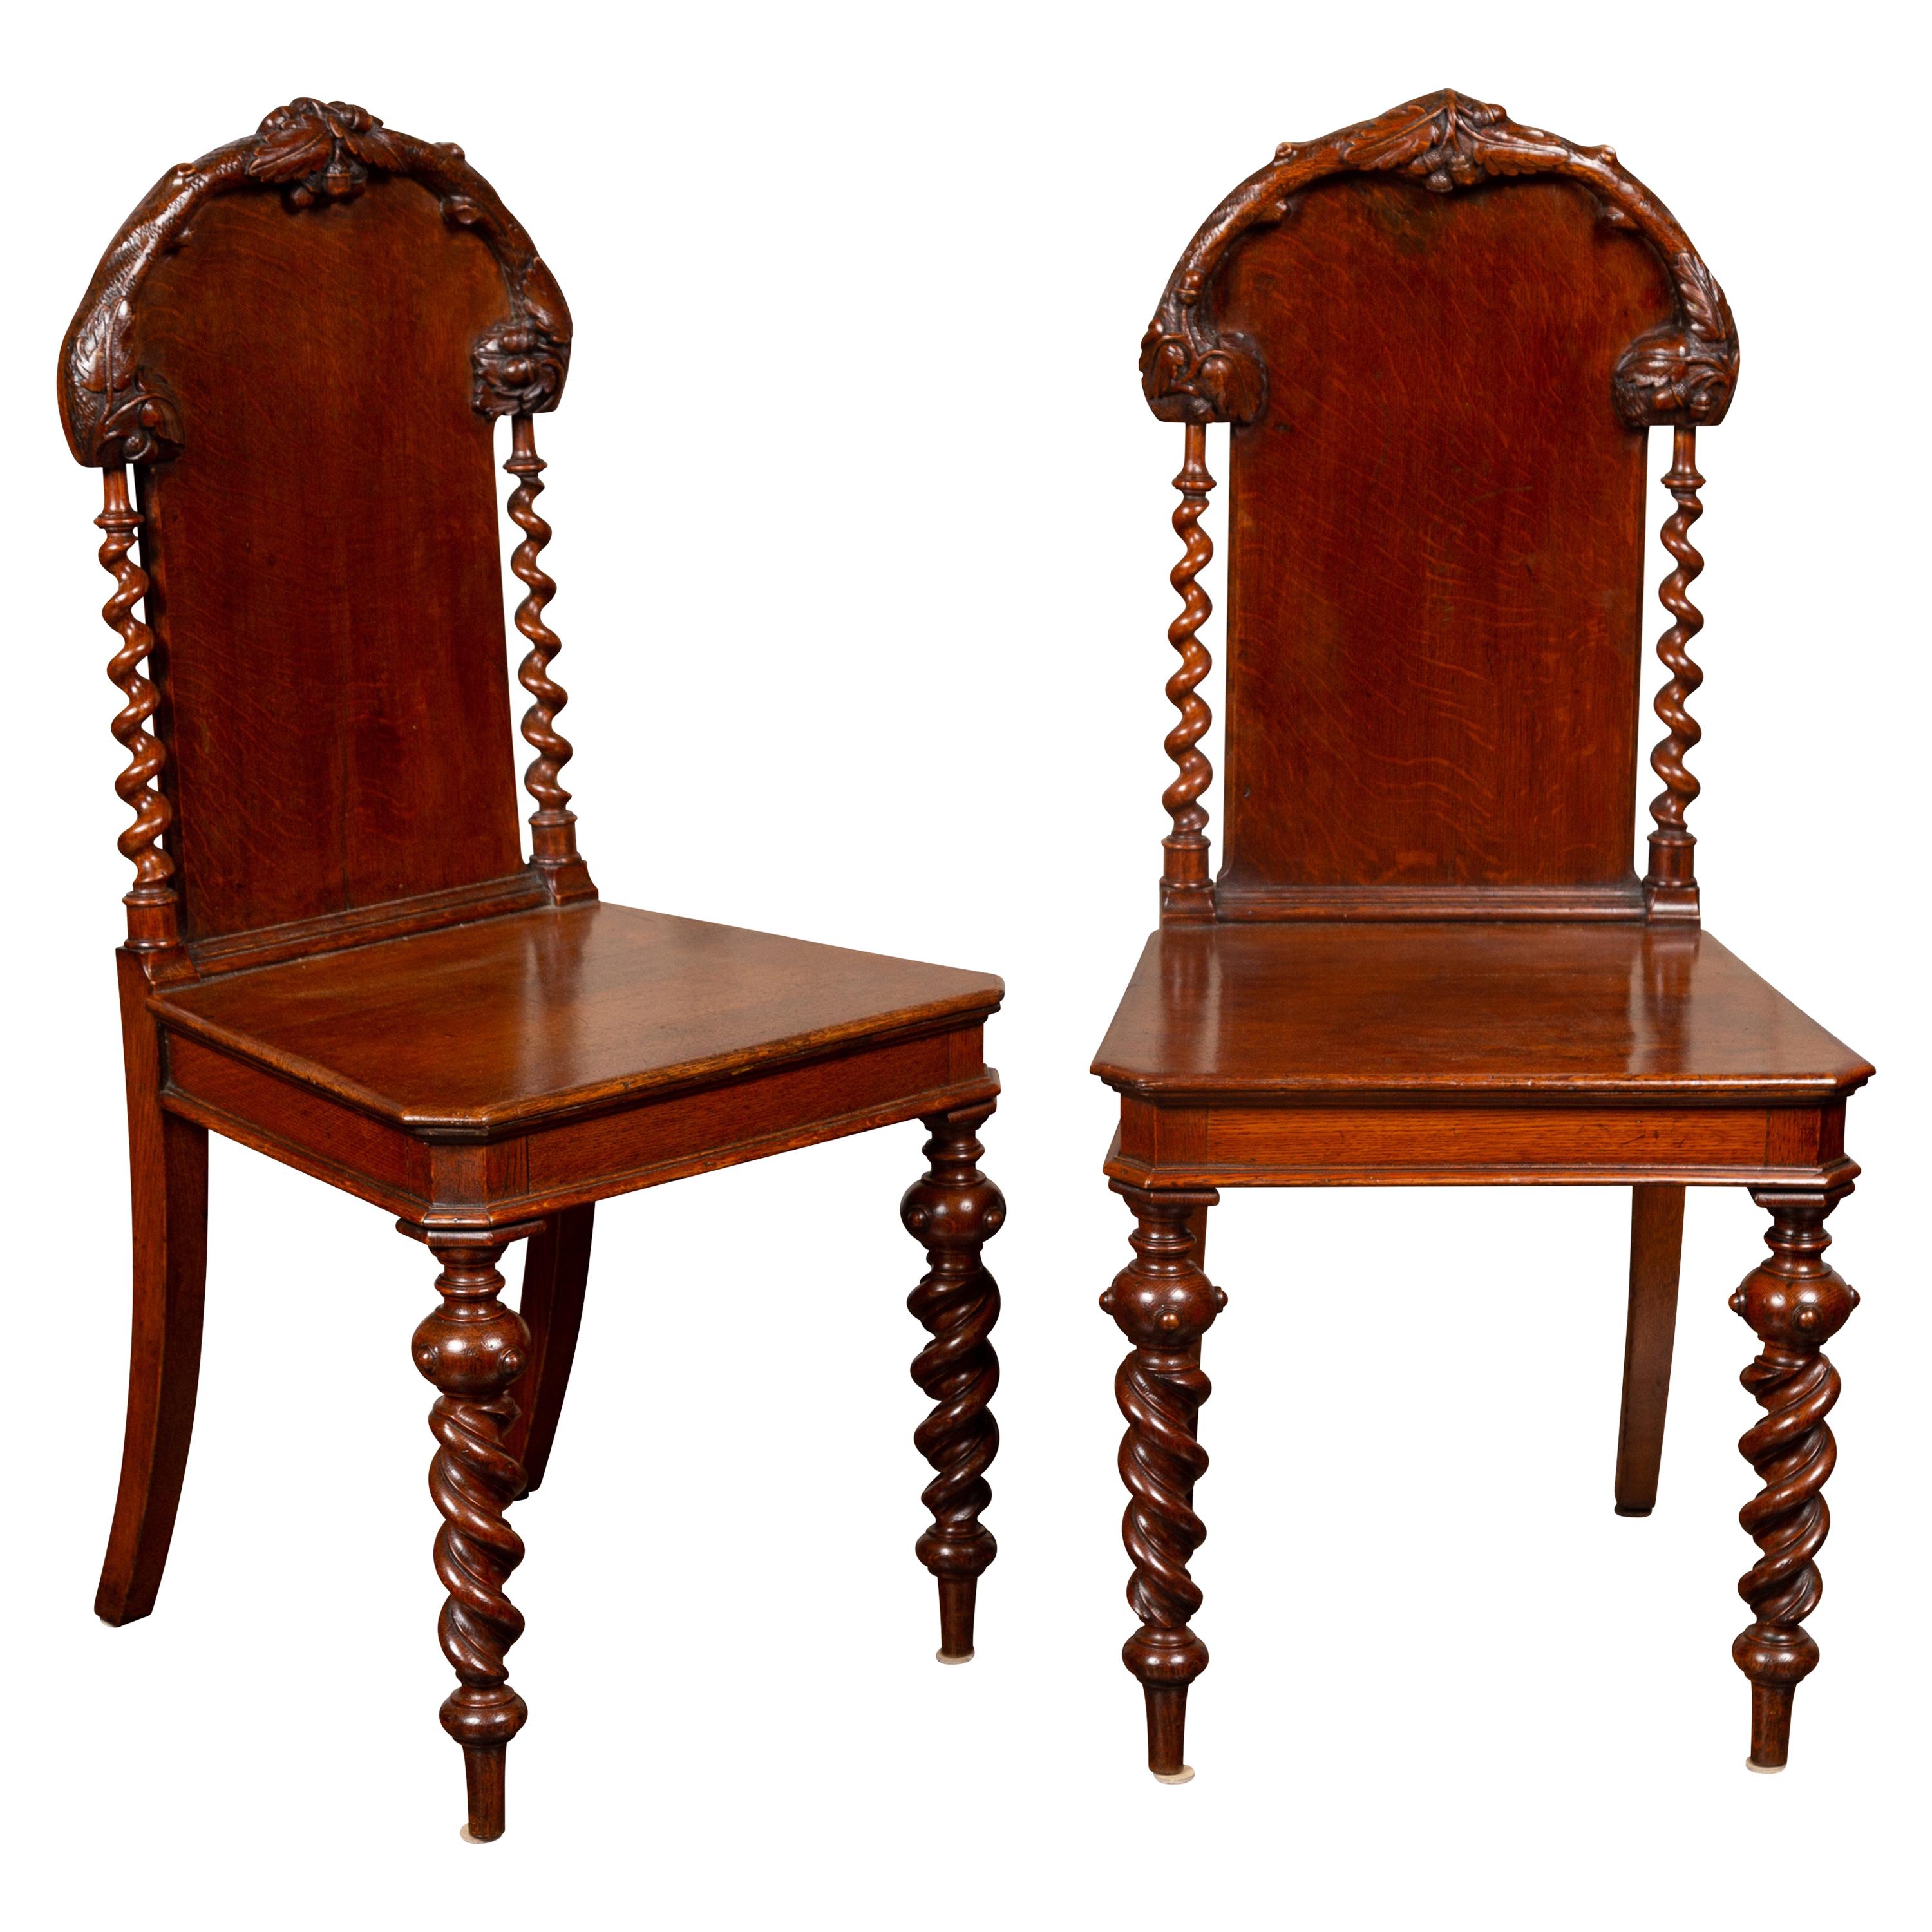 Pair of 1880s English Barley Twist Oak Hall Chairs with Foliage and Acorn Motifs